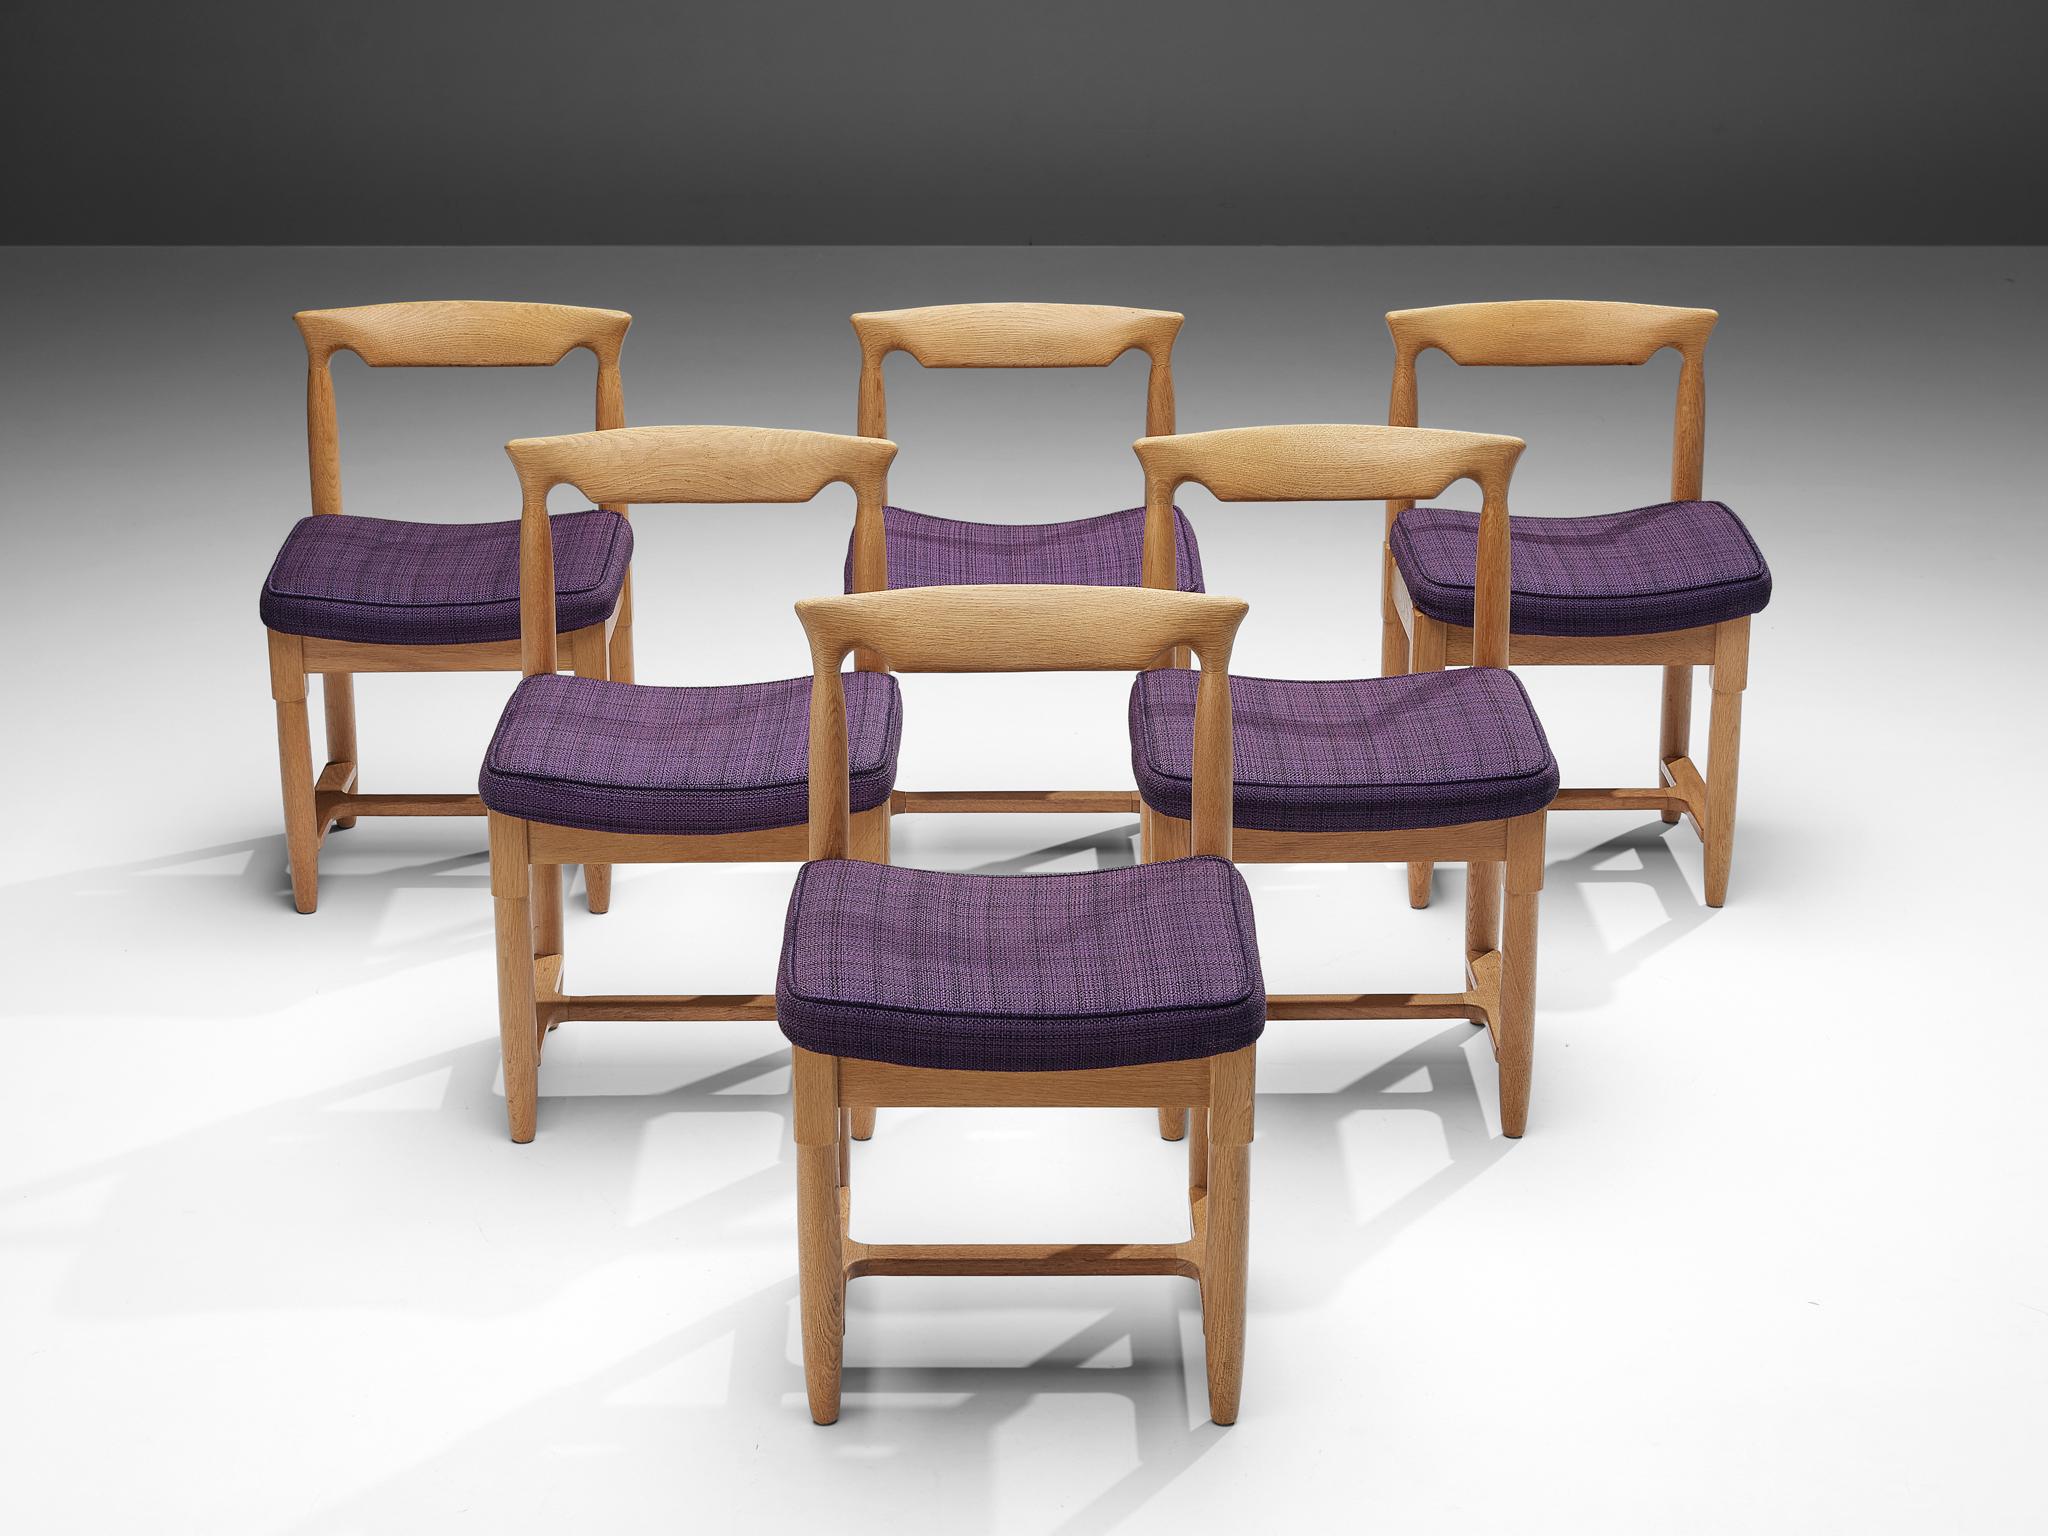 Guillerme et Chambron for Votre Maison, set of six dining chairs, oak, France, 1960s

Beautifully shaped chairs in oak by French designer duo Jacques Chambron and Robert Guillerme. These dining chairs show beautiful lines in every element. The